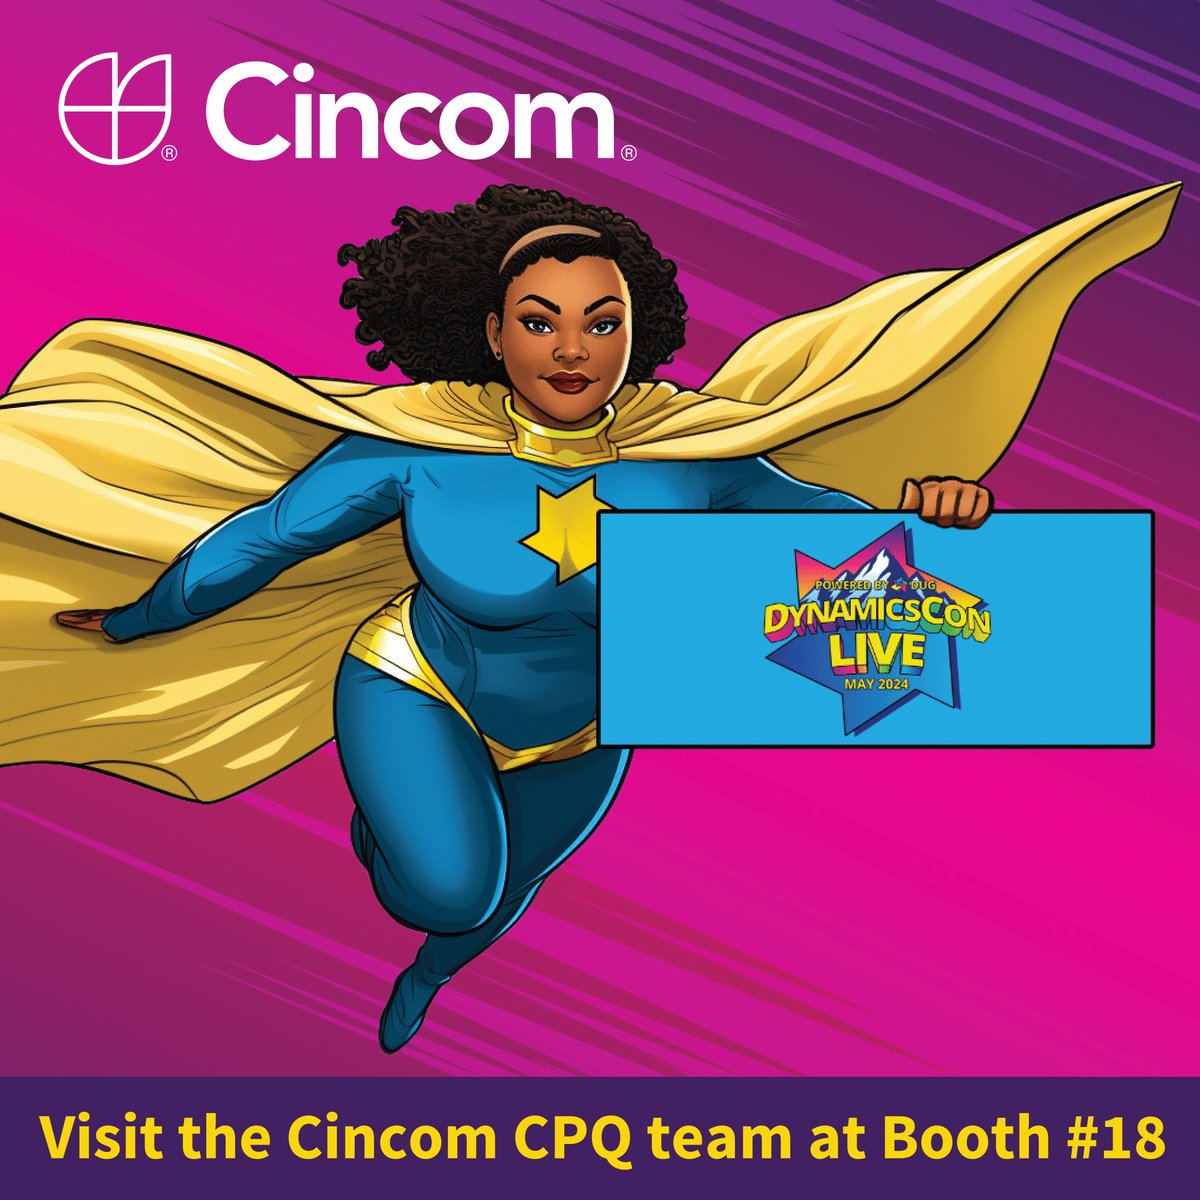 It’s show time! @Dynconference kicks off in Denver, CO, today. Visit the Cincom CPQ team at Booth #18 through Thursday. #DynamicsConLIVE #DUG #Dynamics365 #CPQ #ConfigurePriceQuote